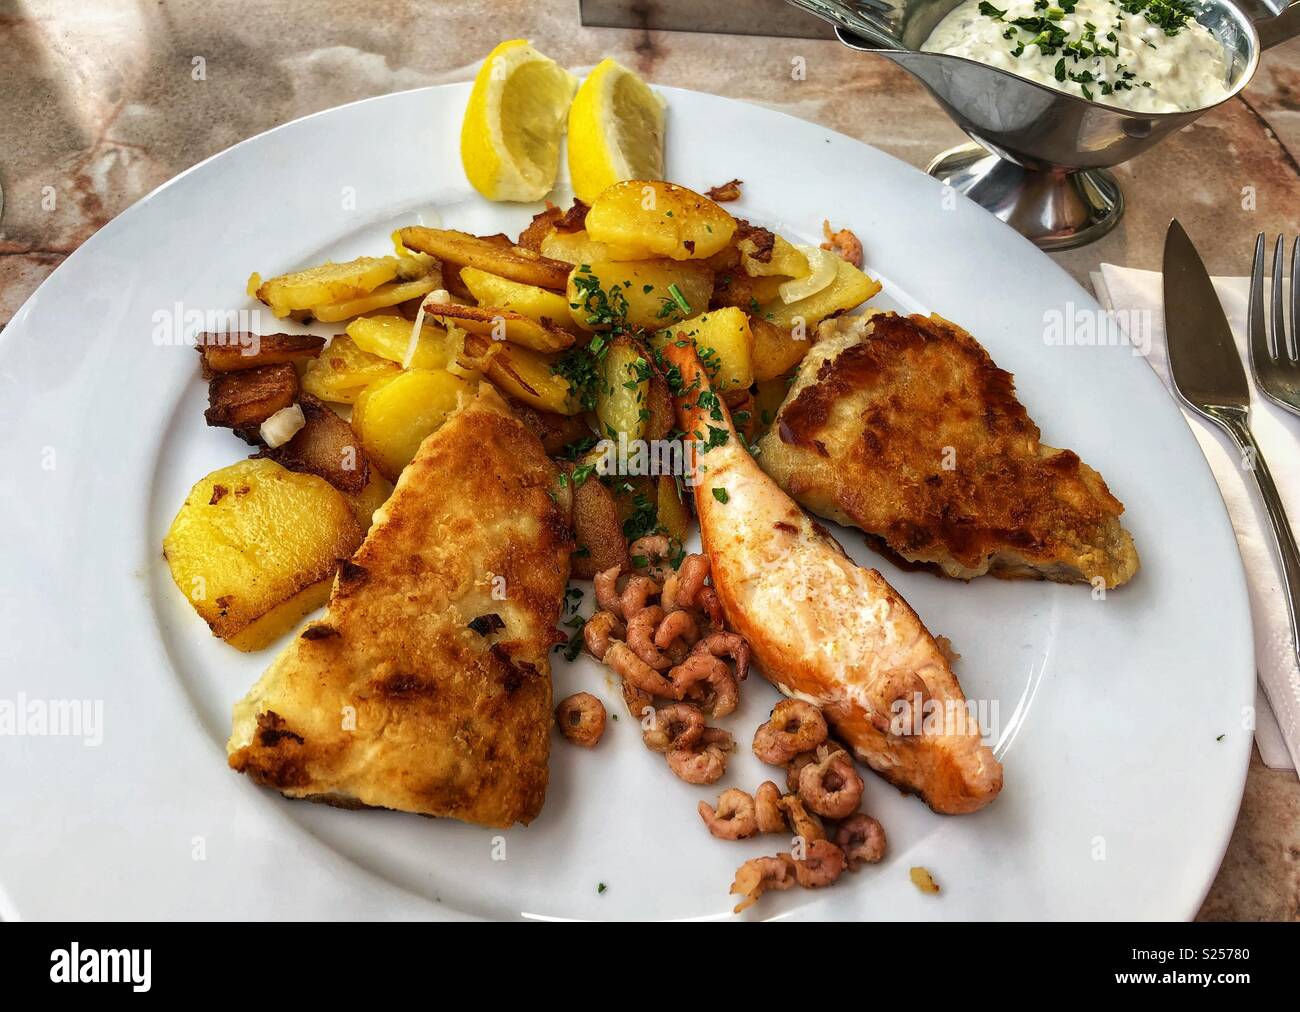 A plate of fish and potatoes, a popular northern German meal. Stock Photo